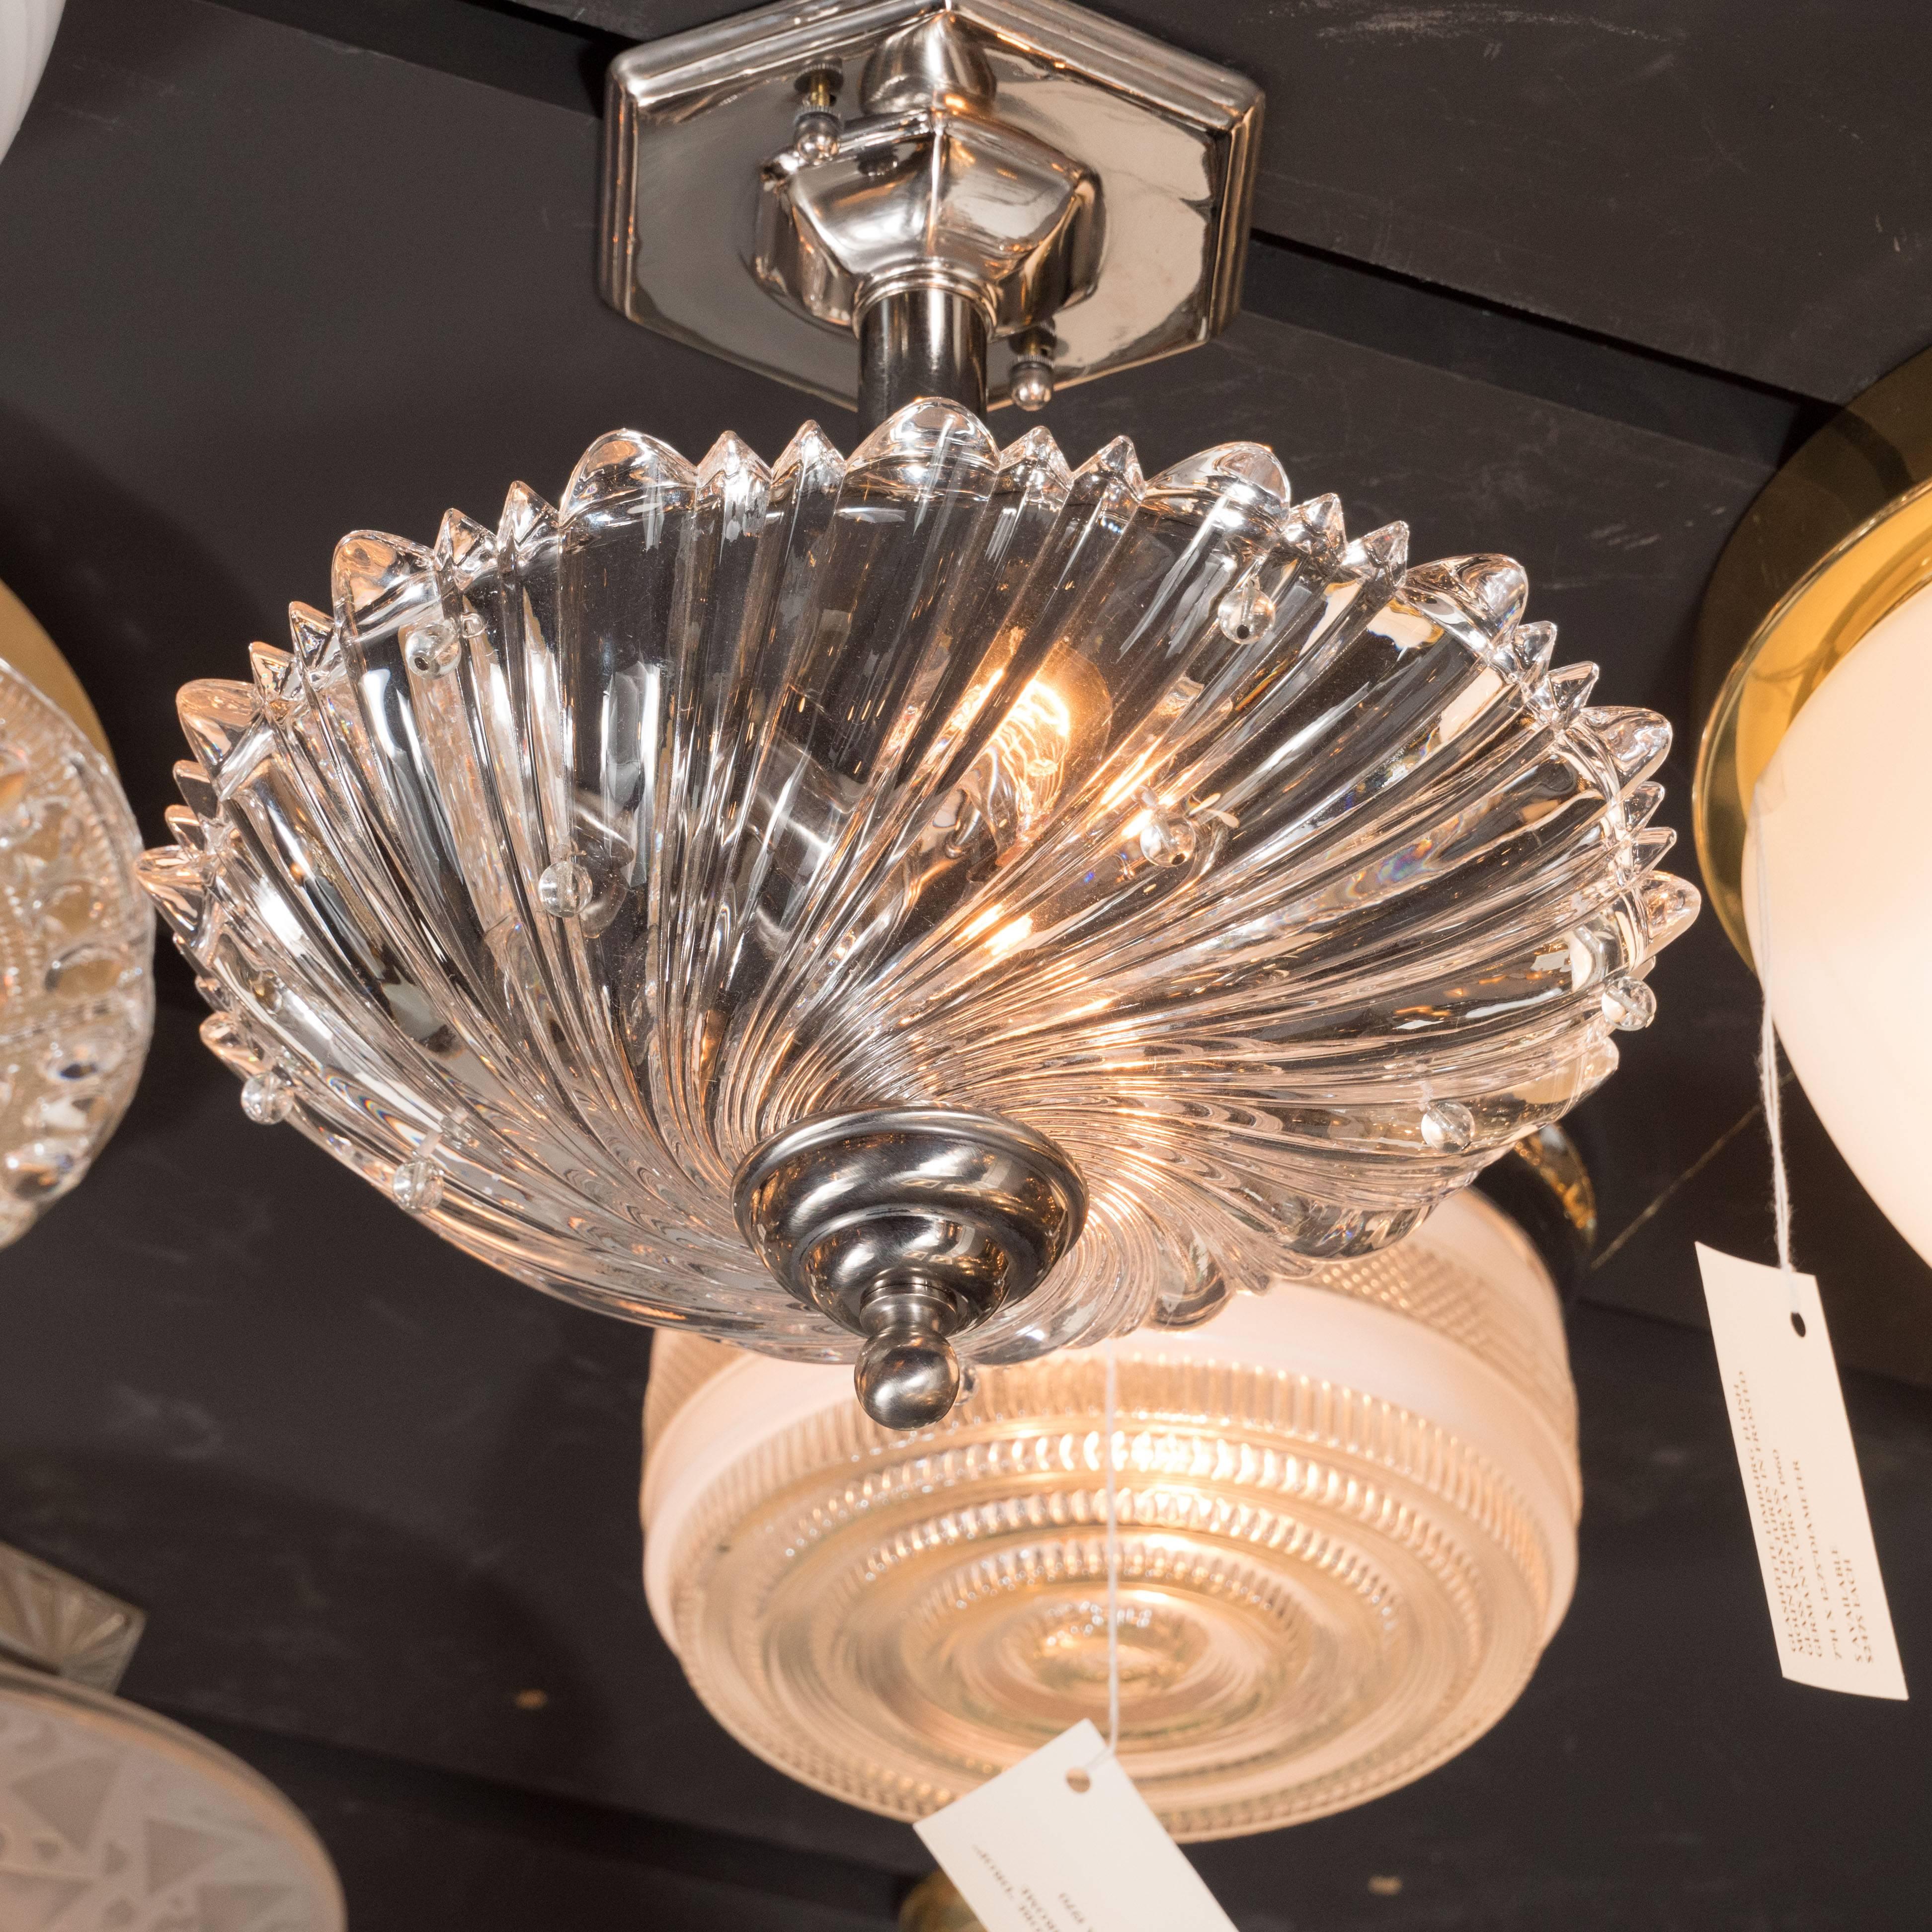 This modernist semi-flush mount features a dynamic whirlpool design in translucent glass with round glass bead embellishments protruding from the heavily textured surface. The fixture attaches to a skyscraper style octagonal base in polished nickel